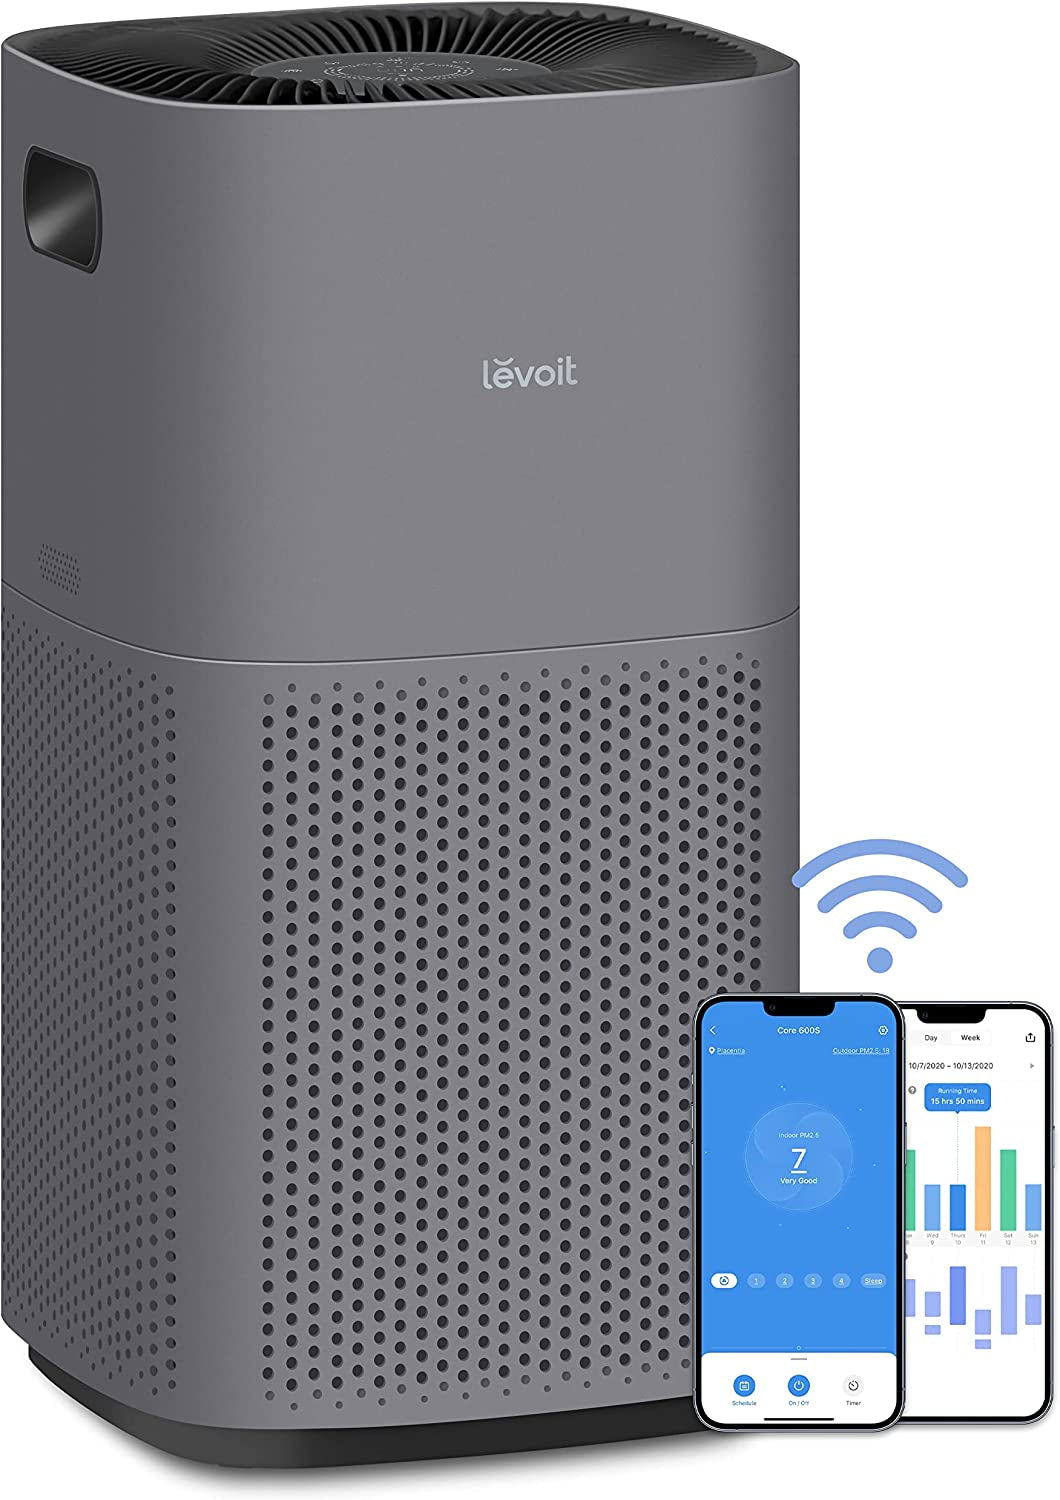 Air Purifiers for Home Large Room, Smart Wifi and PM2.5 Monitor H13 True HEPA Filter Removes up to 99.97% of Particles, Pet Allergies, Smoke, Dust, Auto Mode, Alexa Control, White